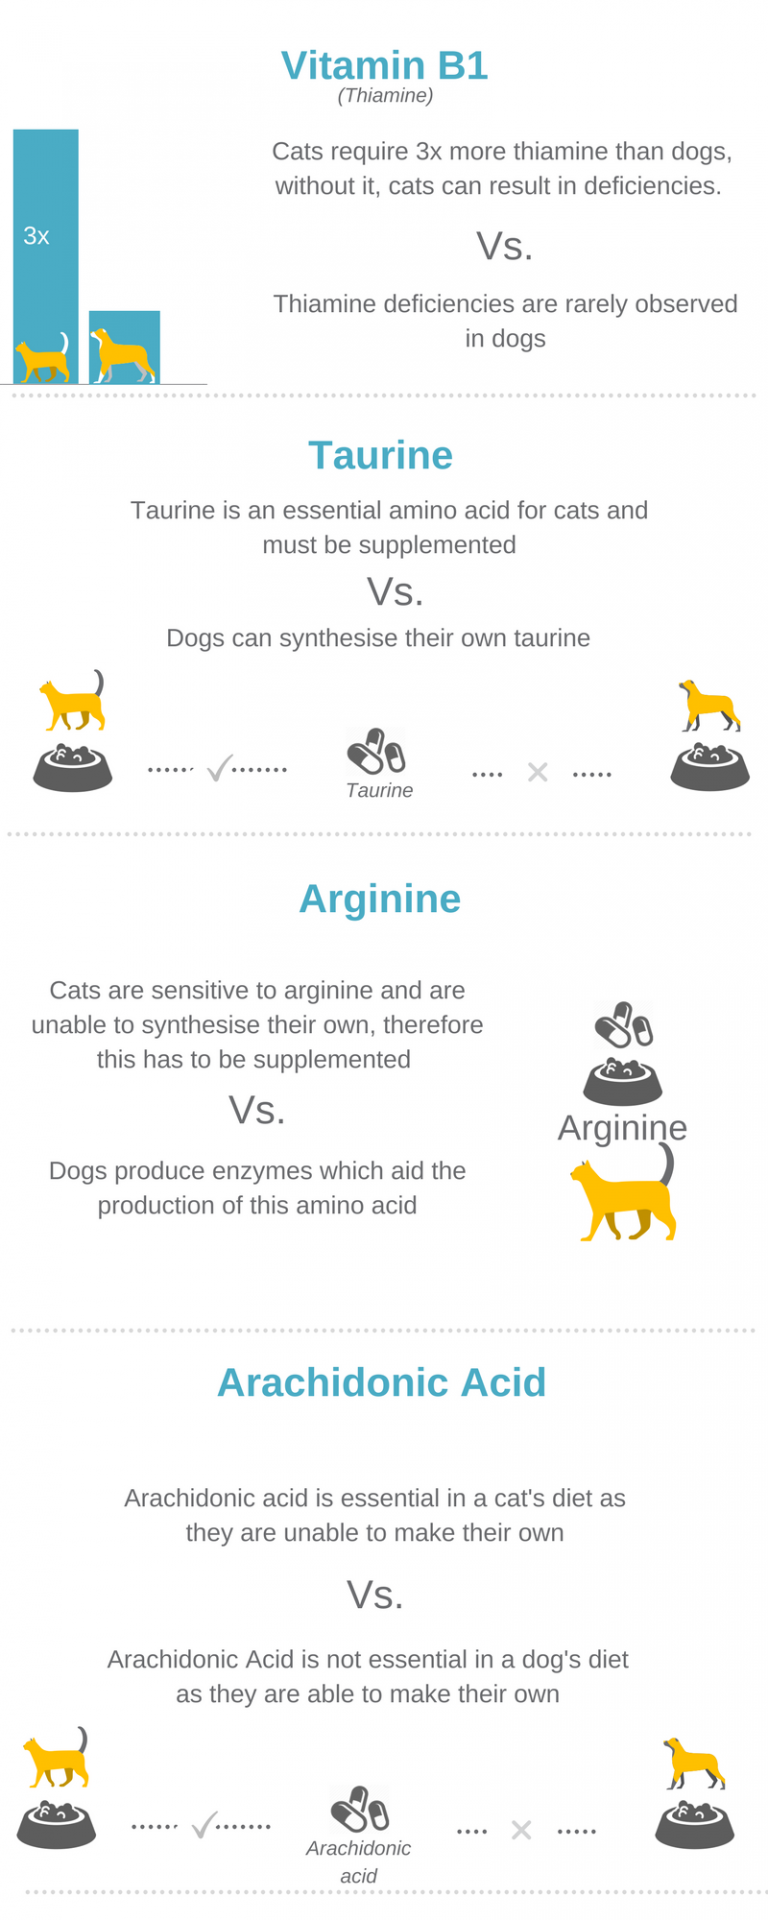 Feeding requirements for cats and dogs